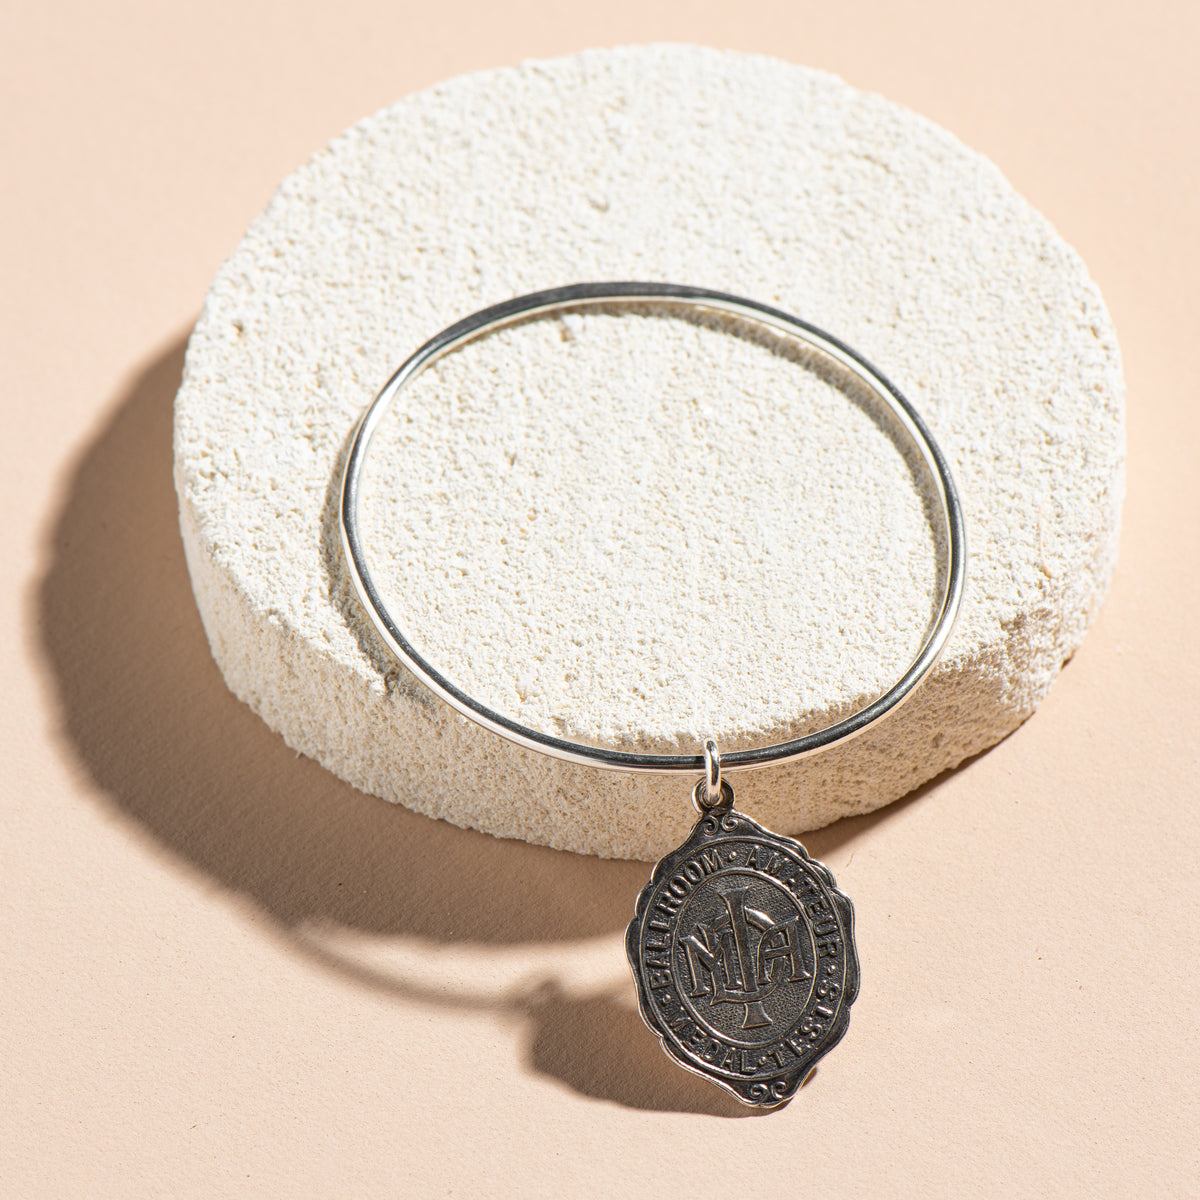 Rounded Oval Bangle with 1946 Vintage Fob Medal